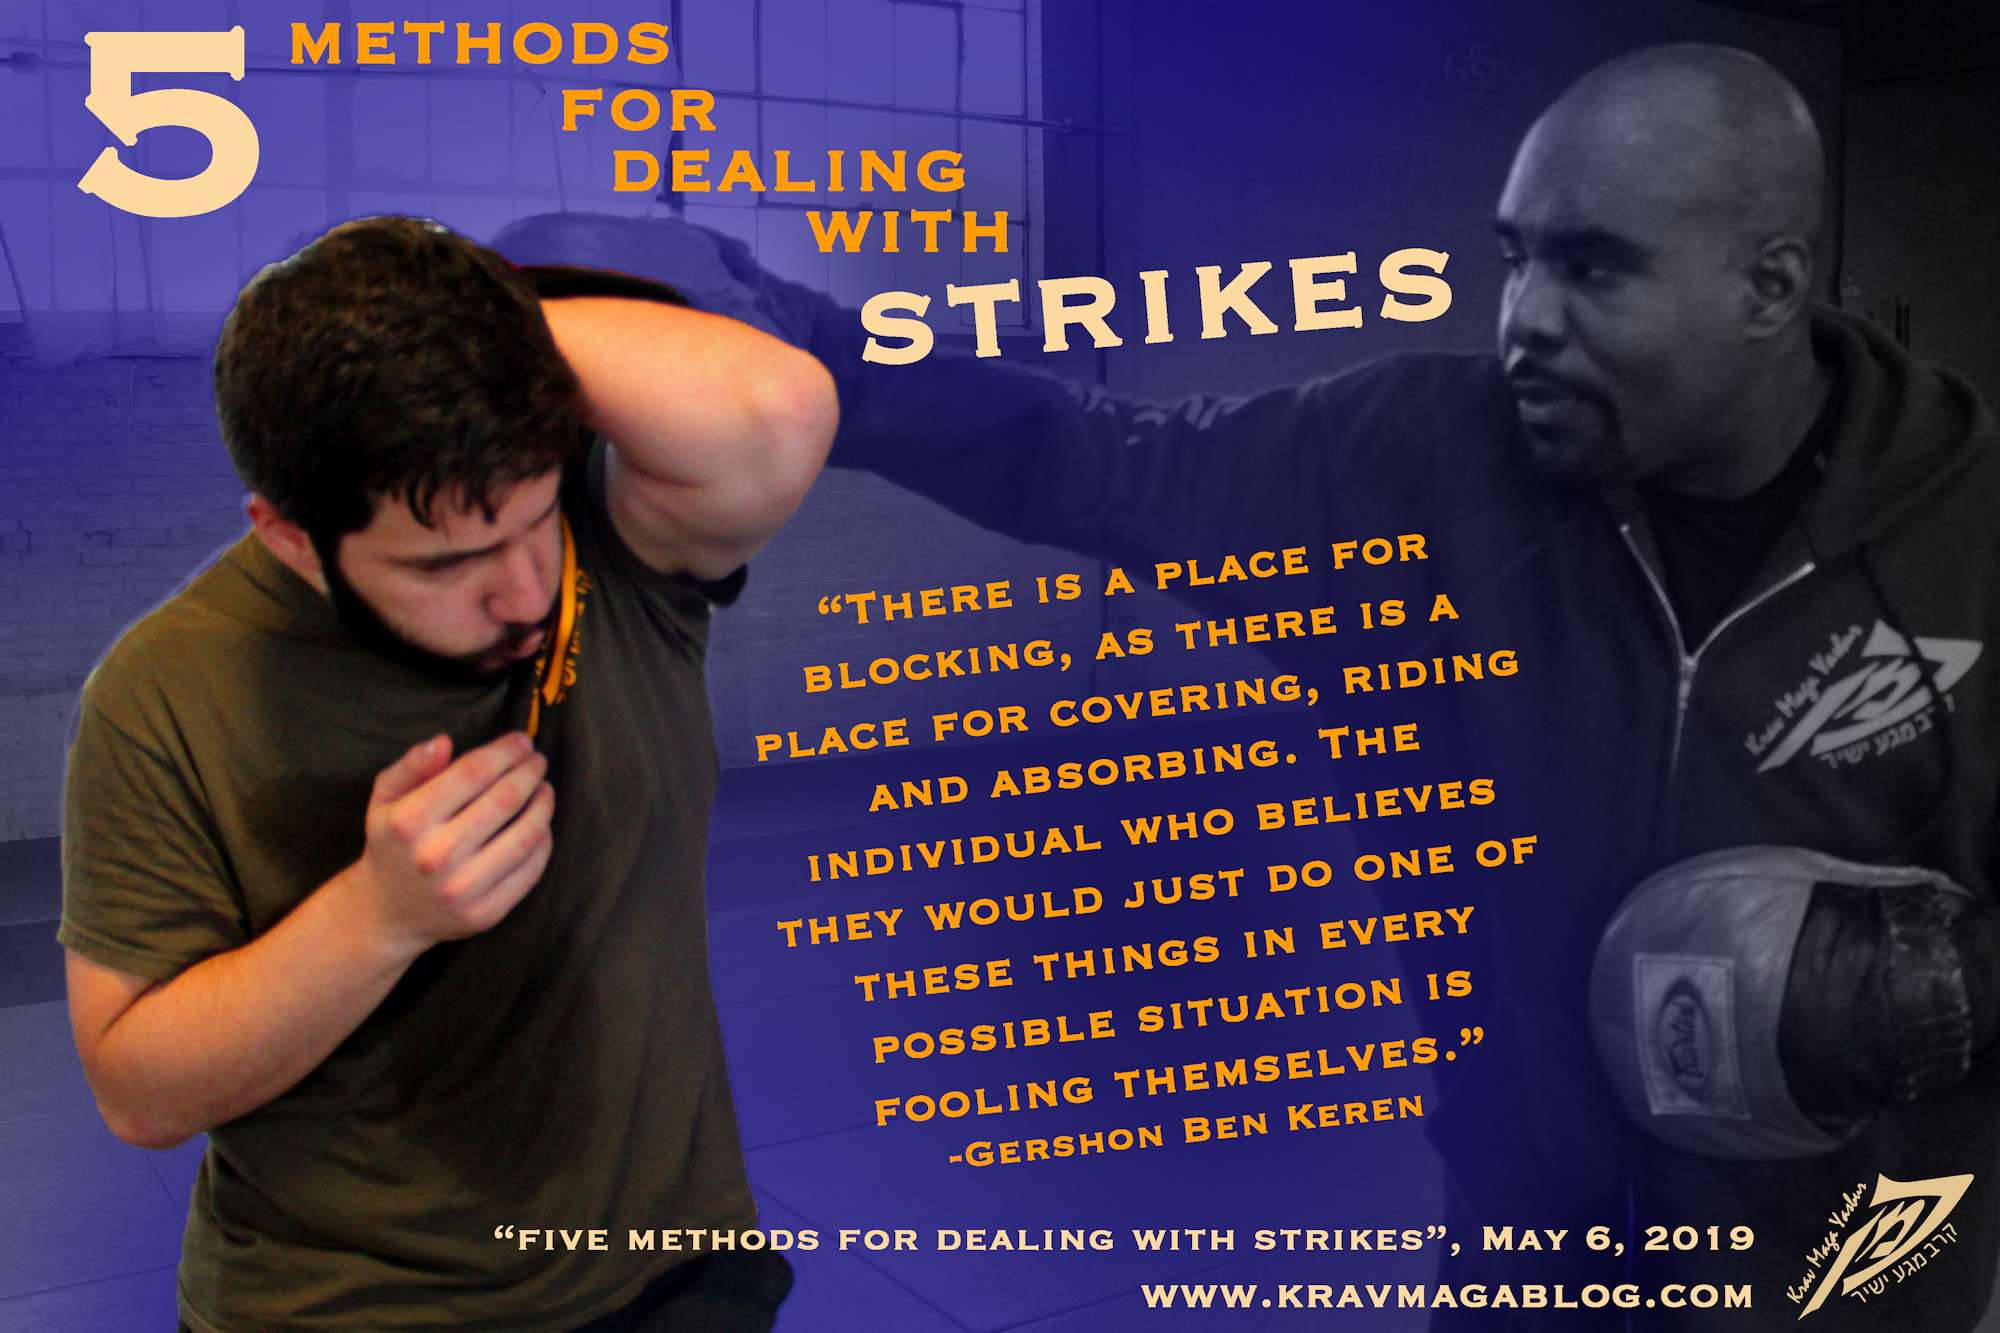 Blog About 5 Methods For Dealing With Strikes